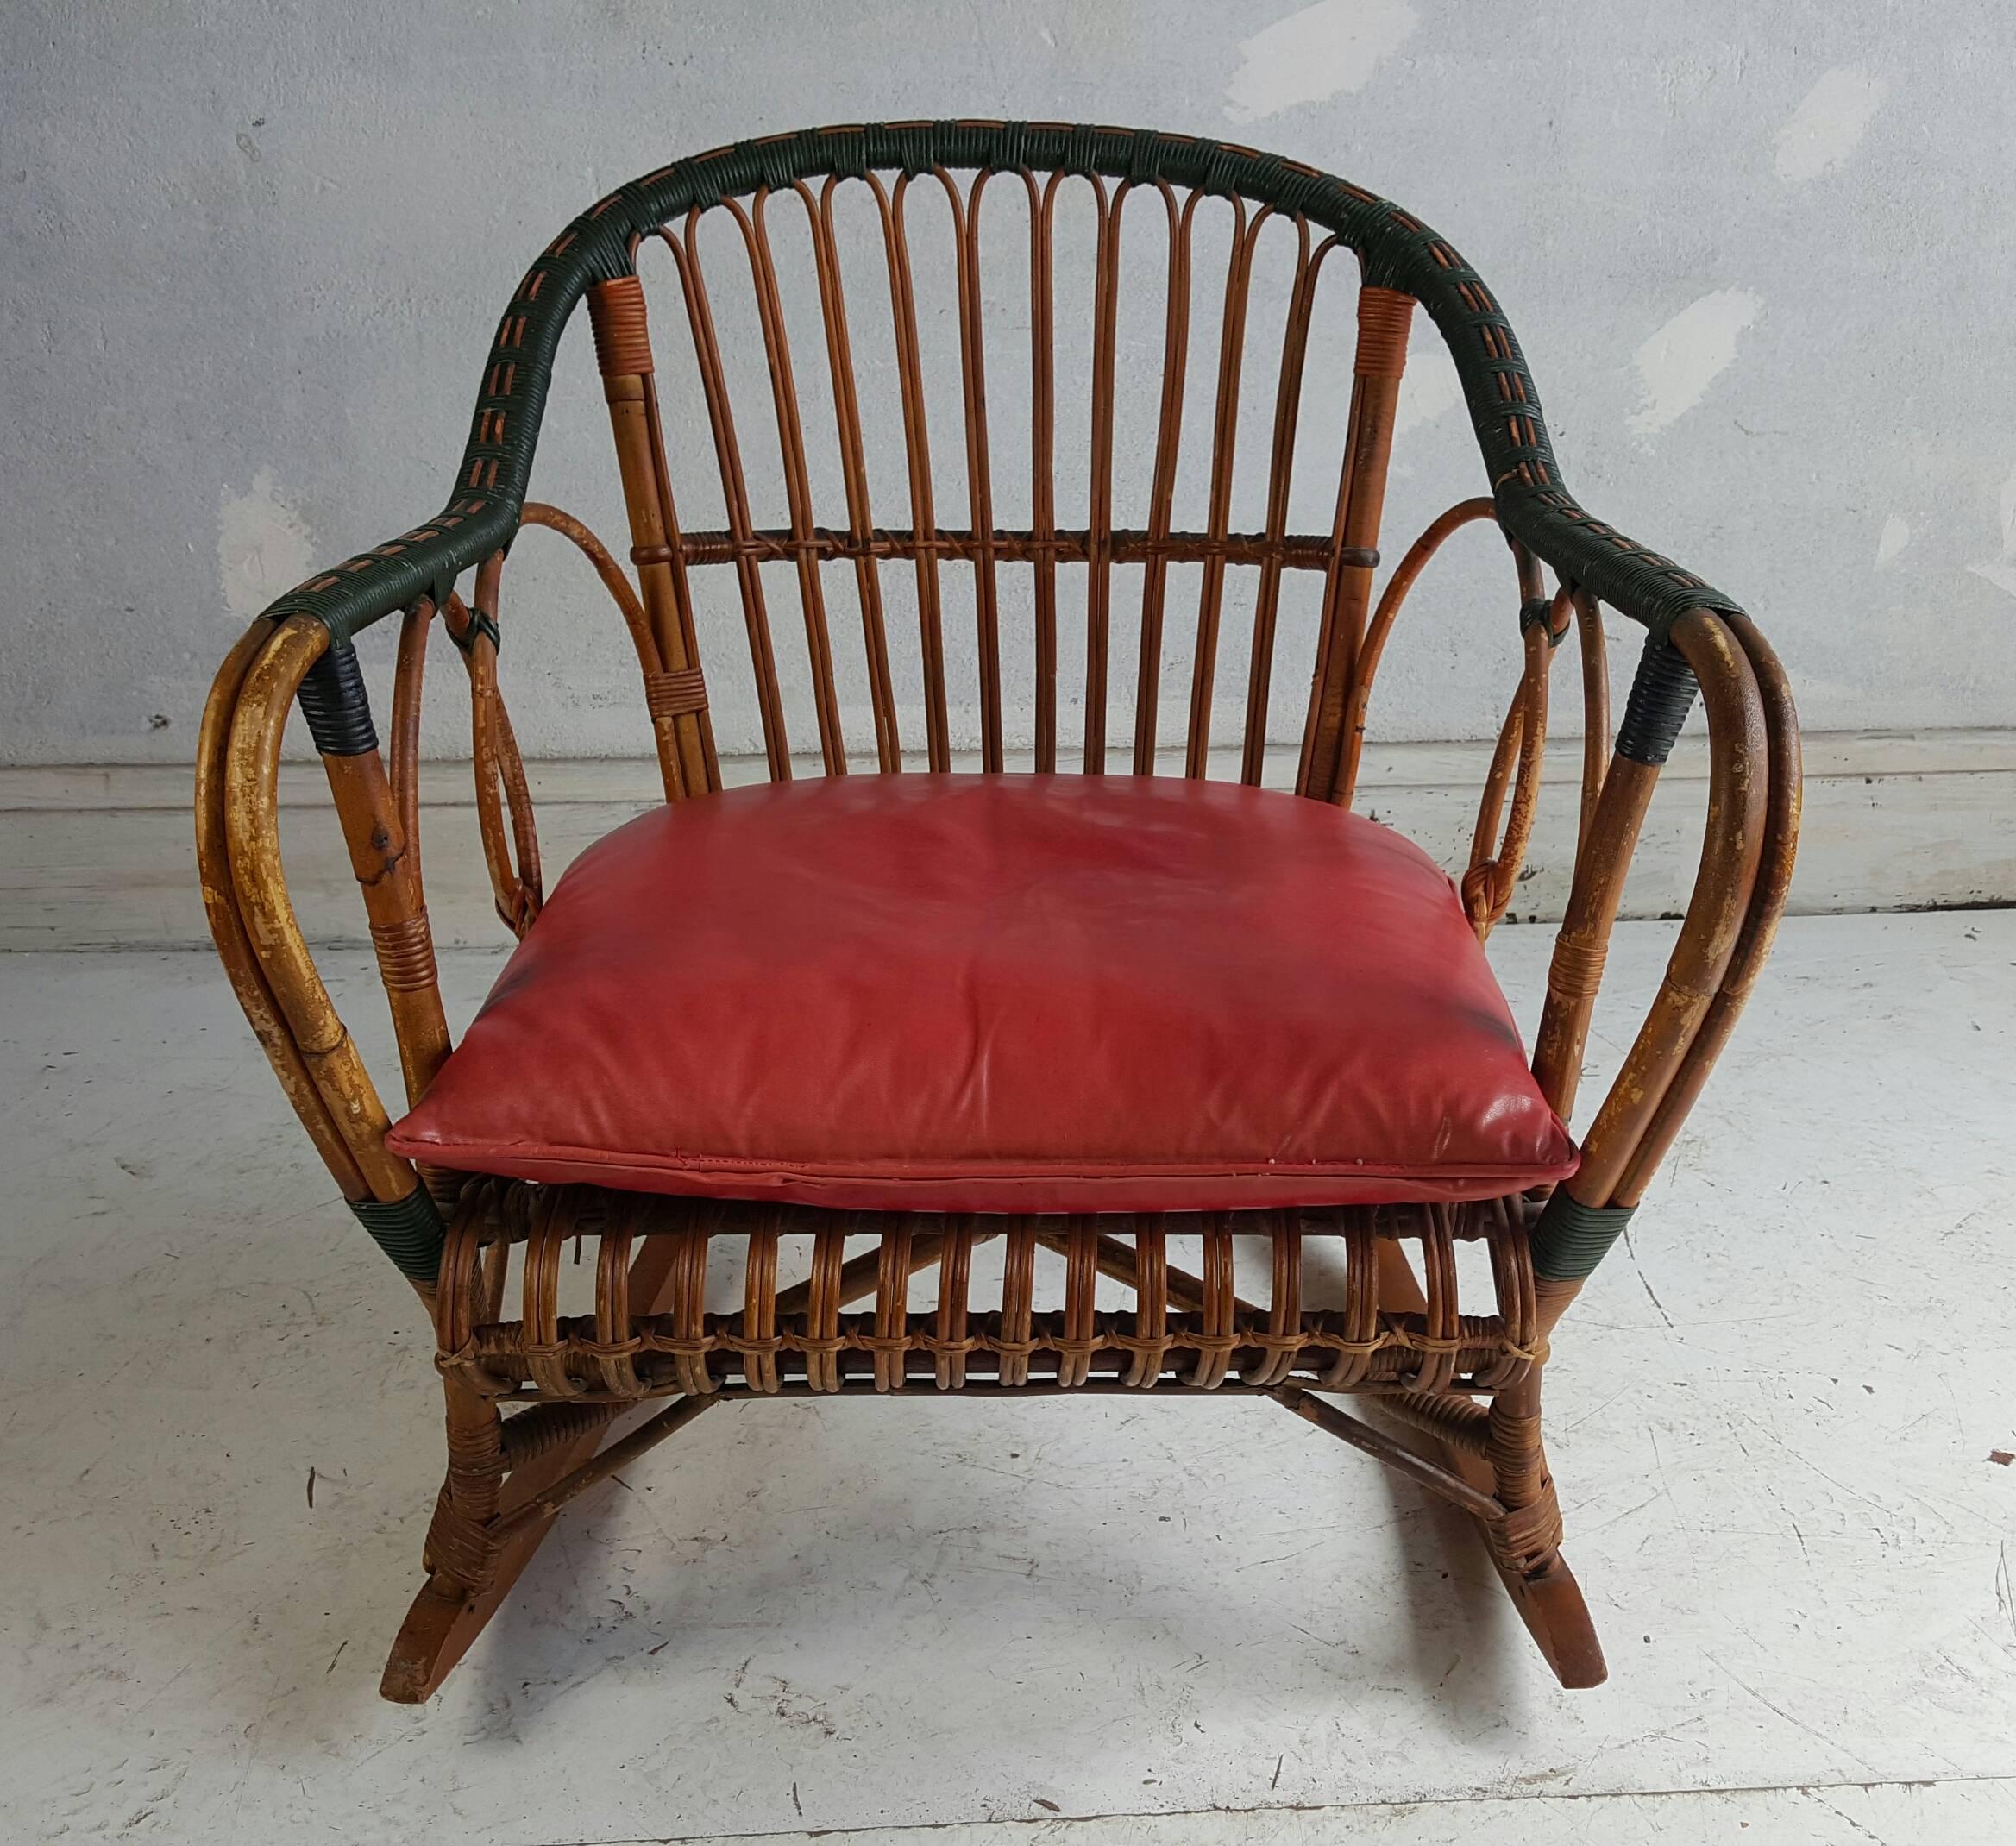 Unusual stick wicker, split reed rocking chair. Classic Art Deco style, extremely comfortable, retains original finish, wonderful hunters green patinaed paint. Attributed to Ypsilani Reed Furniture co.